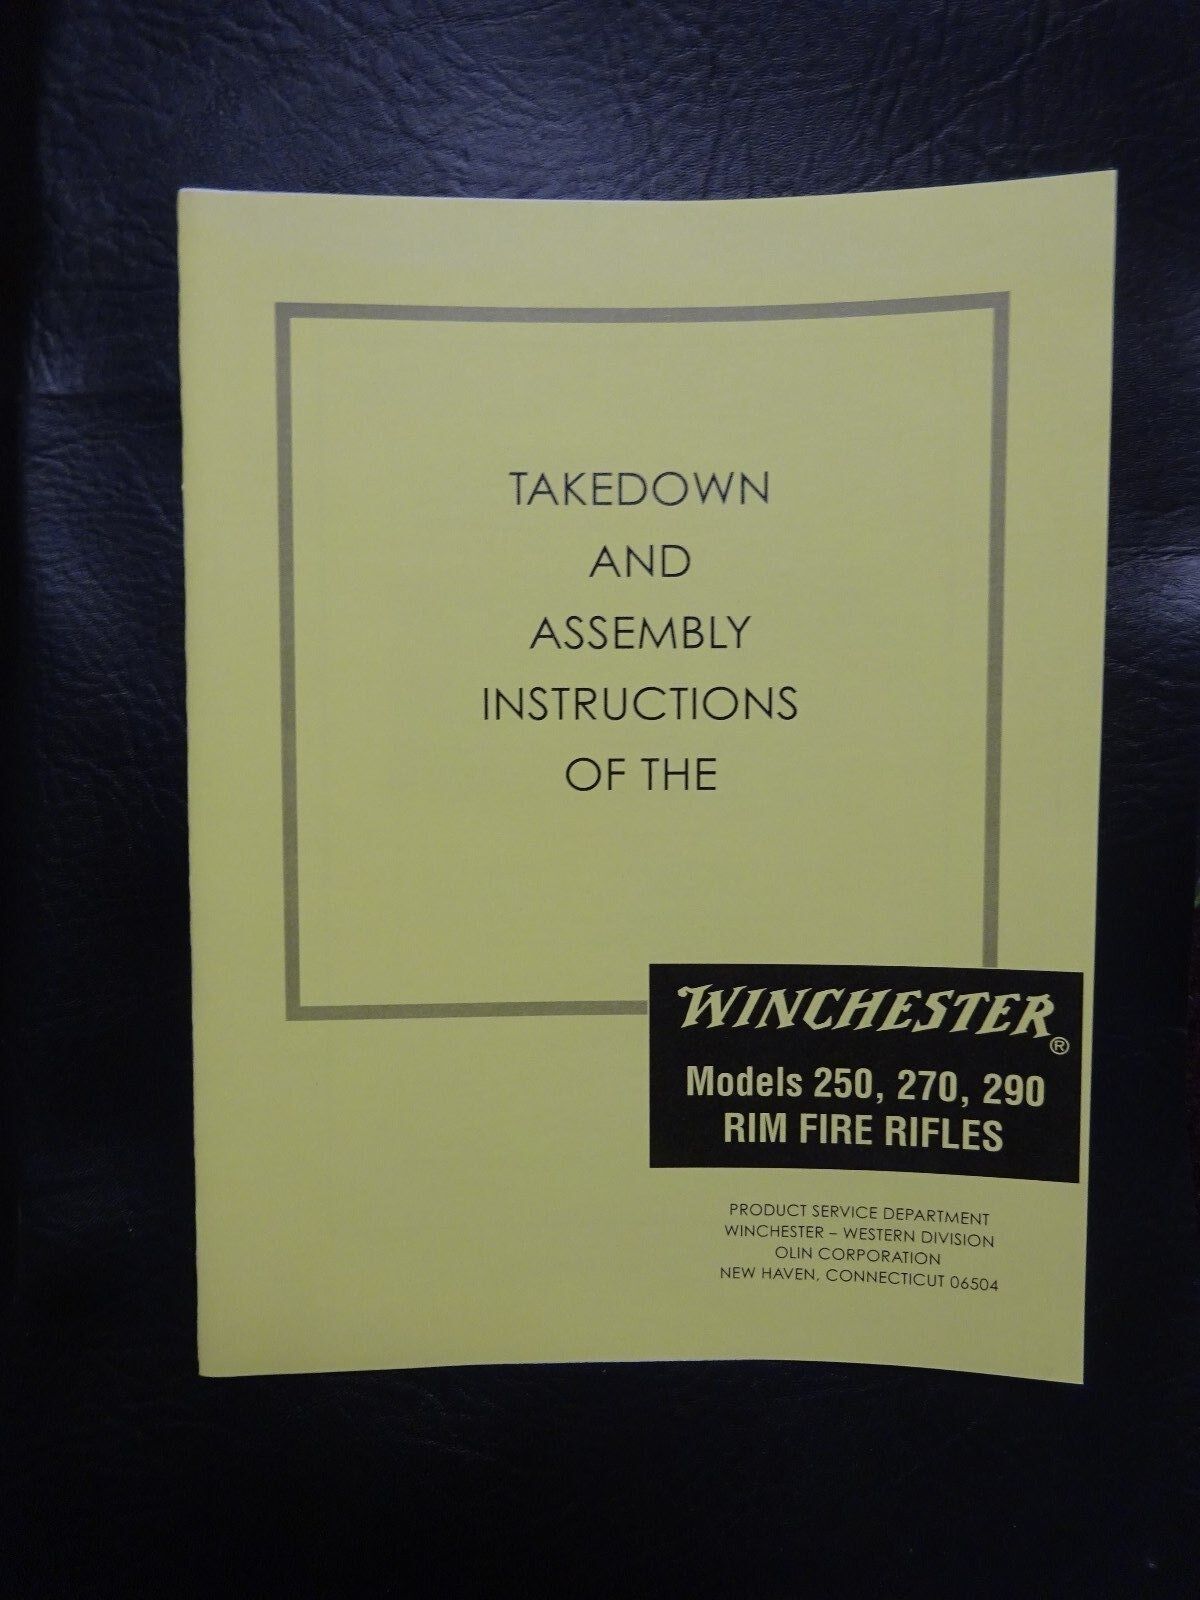 Winchester takedown manual for the 250, 270, 290 Rim Fire Rifles